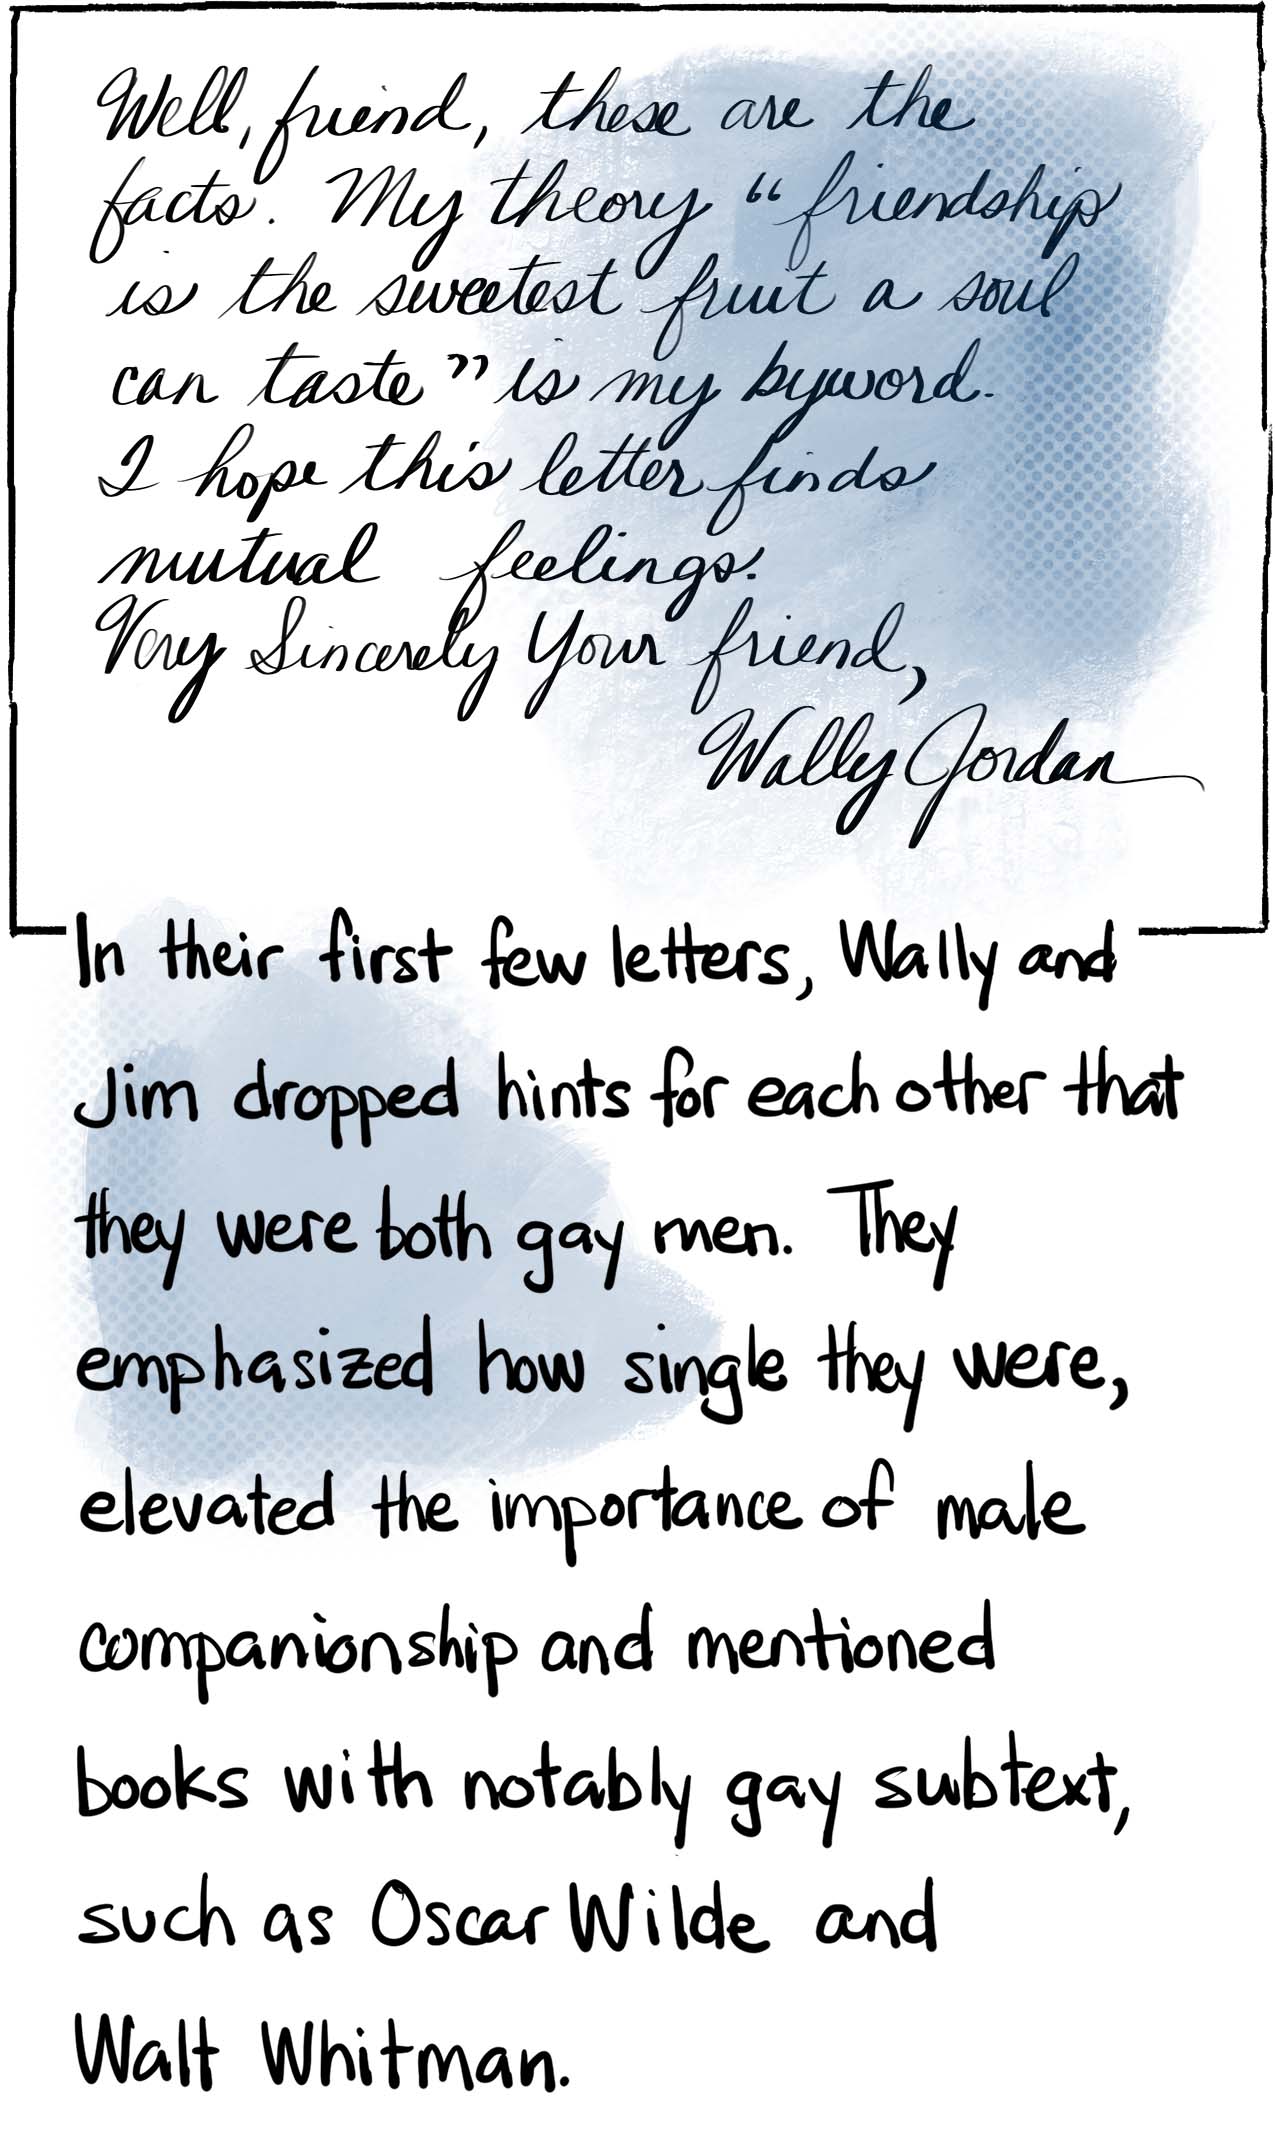 Image of handwritten letter states: Well, friend, these are the facts. My theory, “Friendship is the sweetest fruit a soul can taste is my byword.” You can make your decision easily enough. I hope this letter finds mutual feelings. Very Sincerely Your Friend, Wally Jordan. Text: In their first few letters, Wally and Jim dropped hints for each other that they were both gay men. They emphasized how single they were, elevated the importance of male companionship and mentioned books by authors with notably gay subtext, such as Oscar Wilde and Walt Whitman.